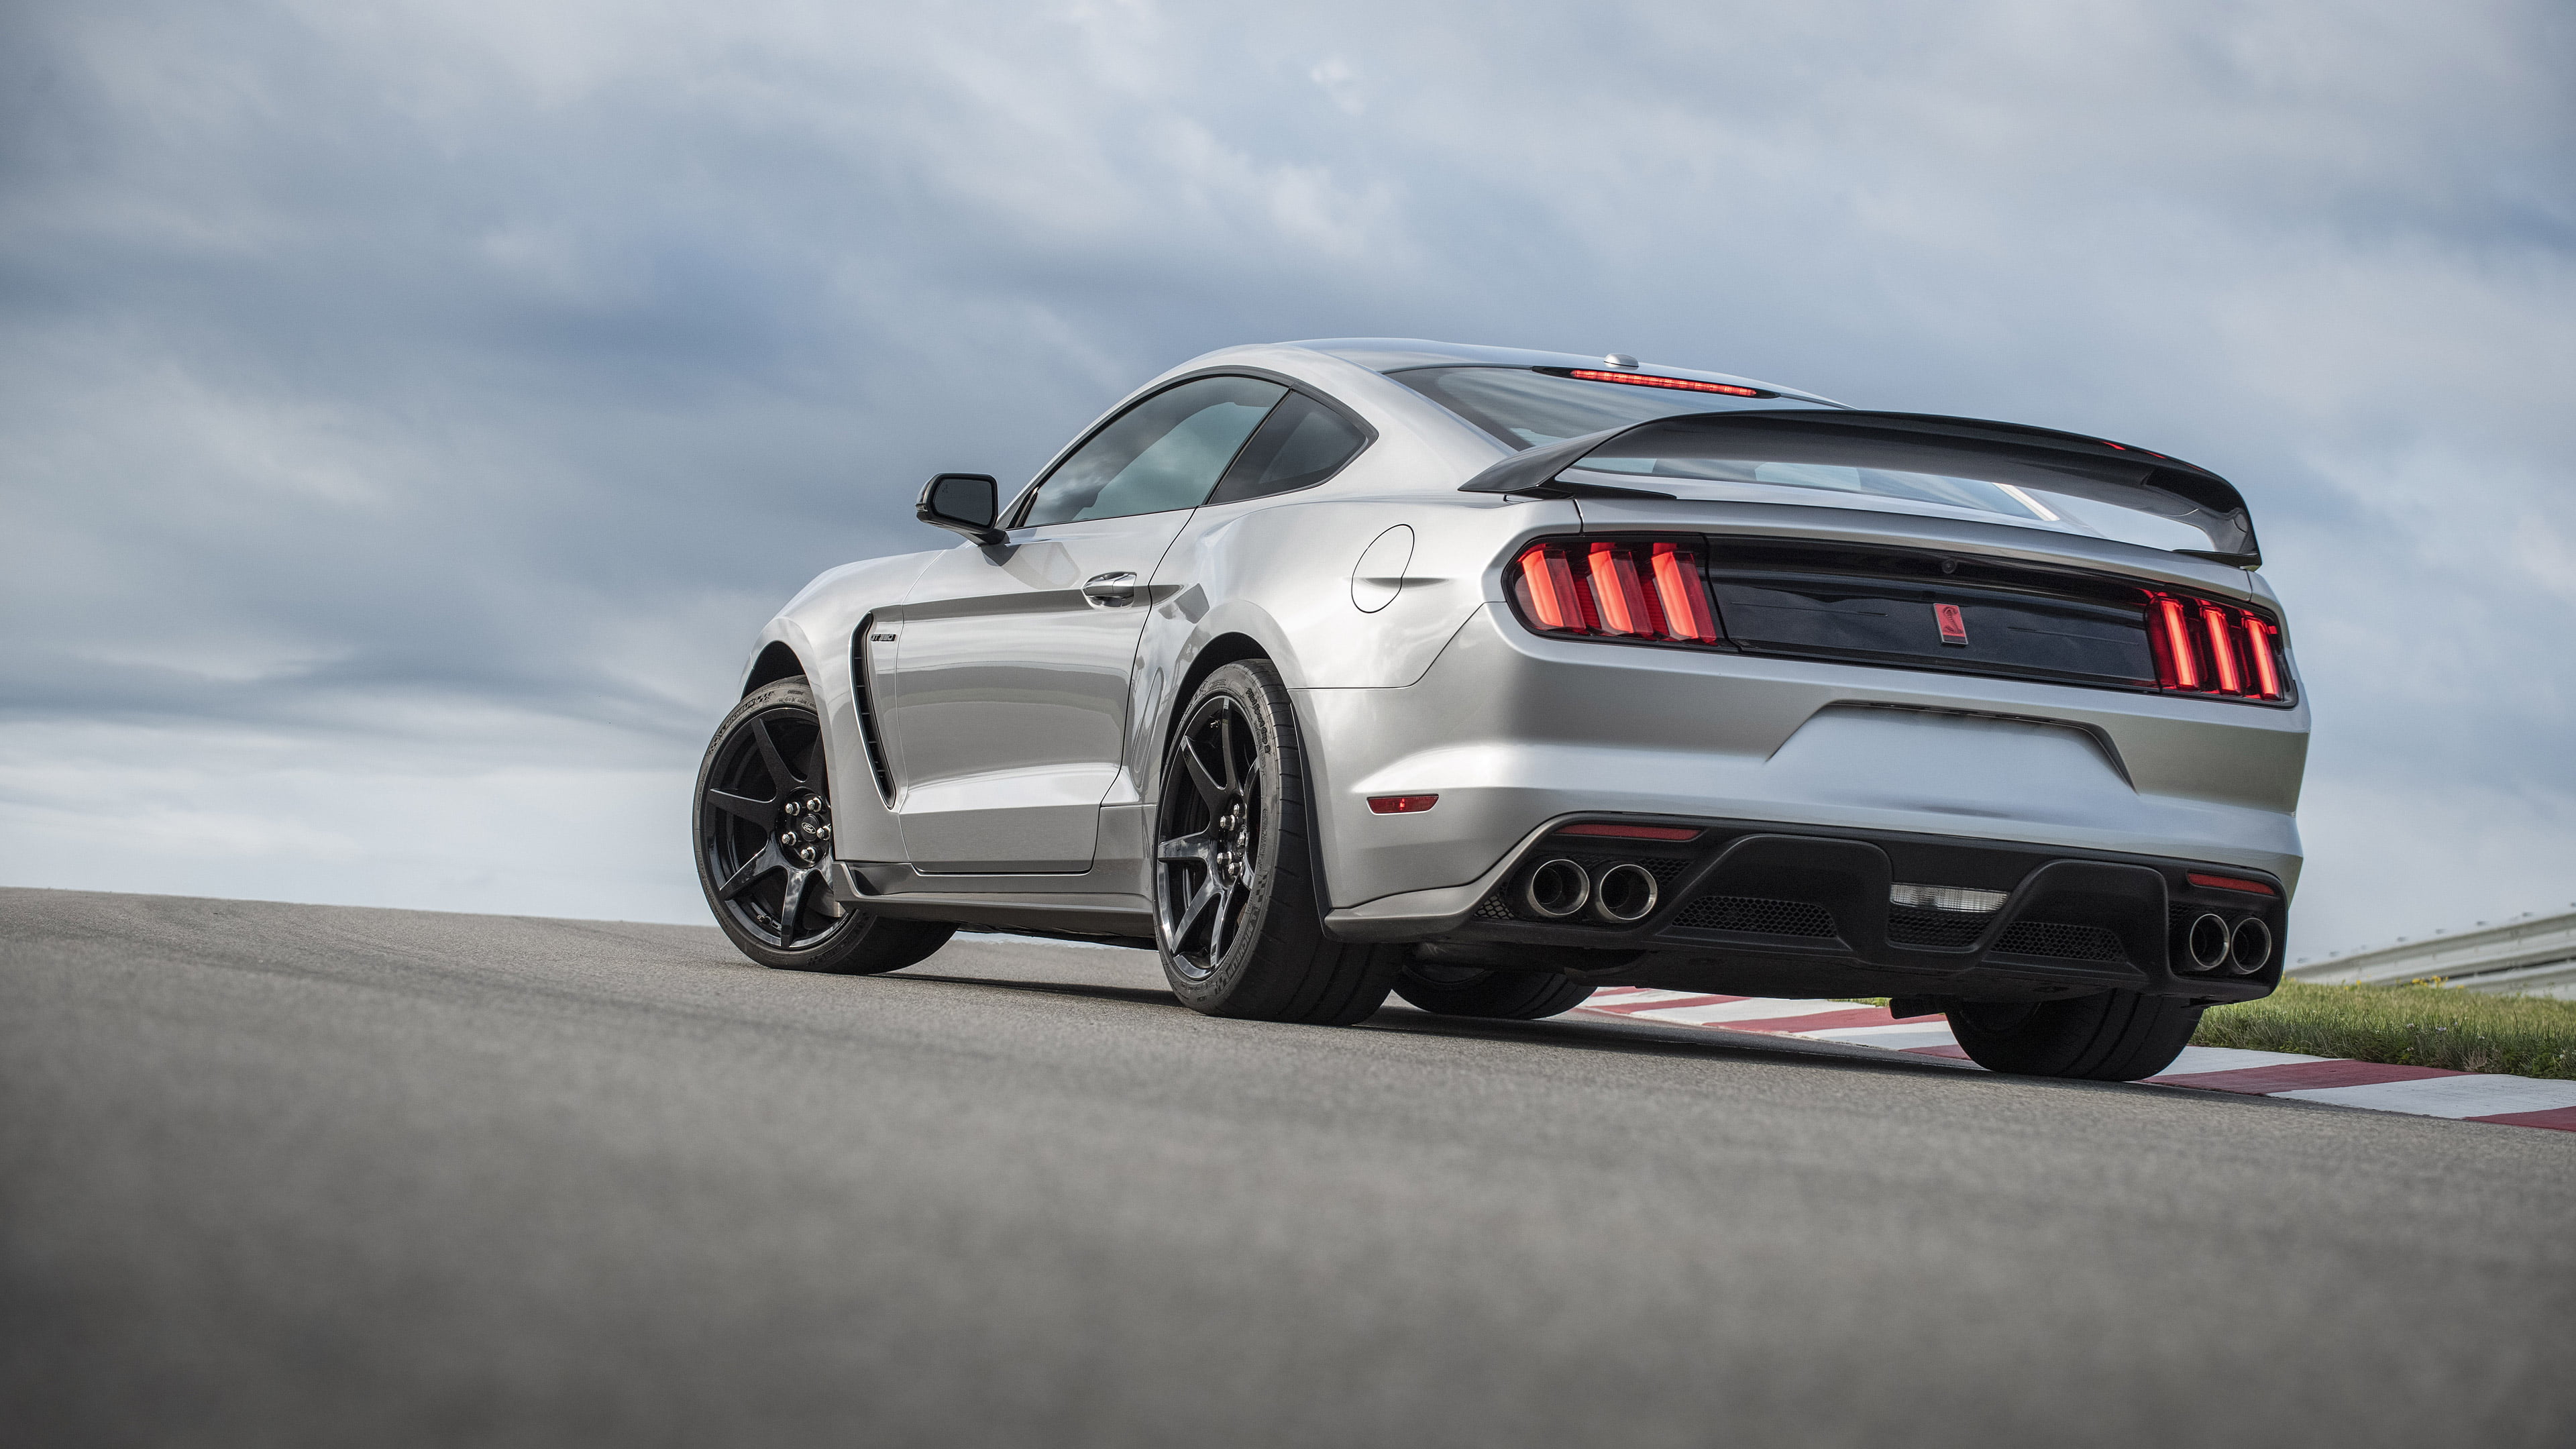 Ford Mustang Shelby GT350, car, vehicle, muscle car